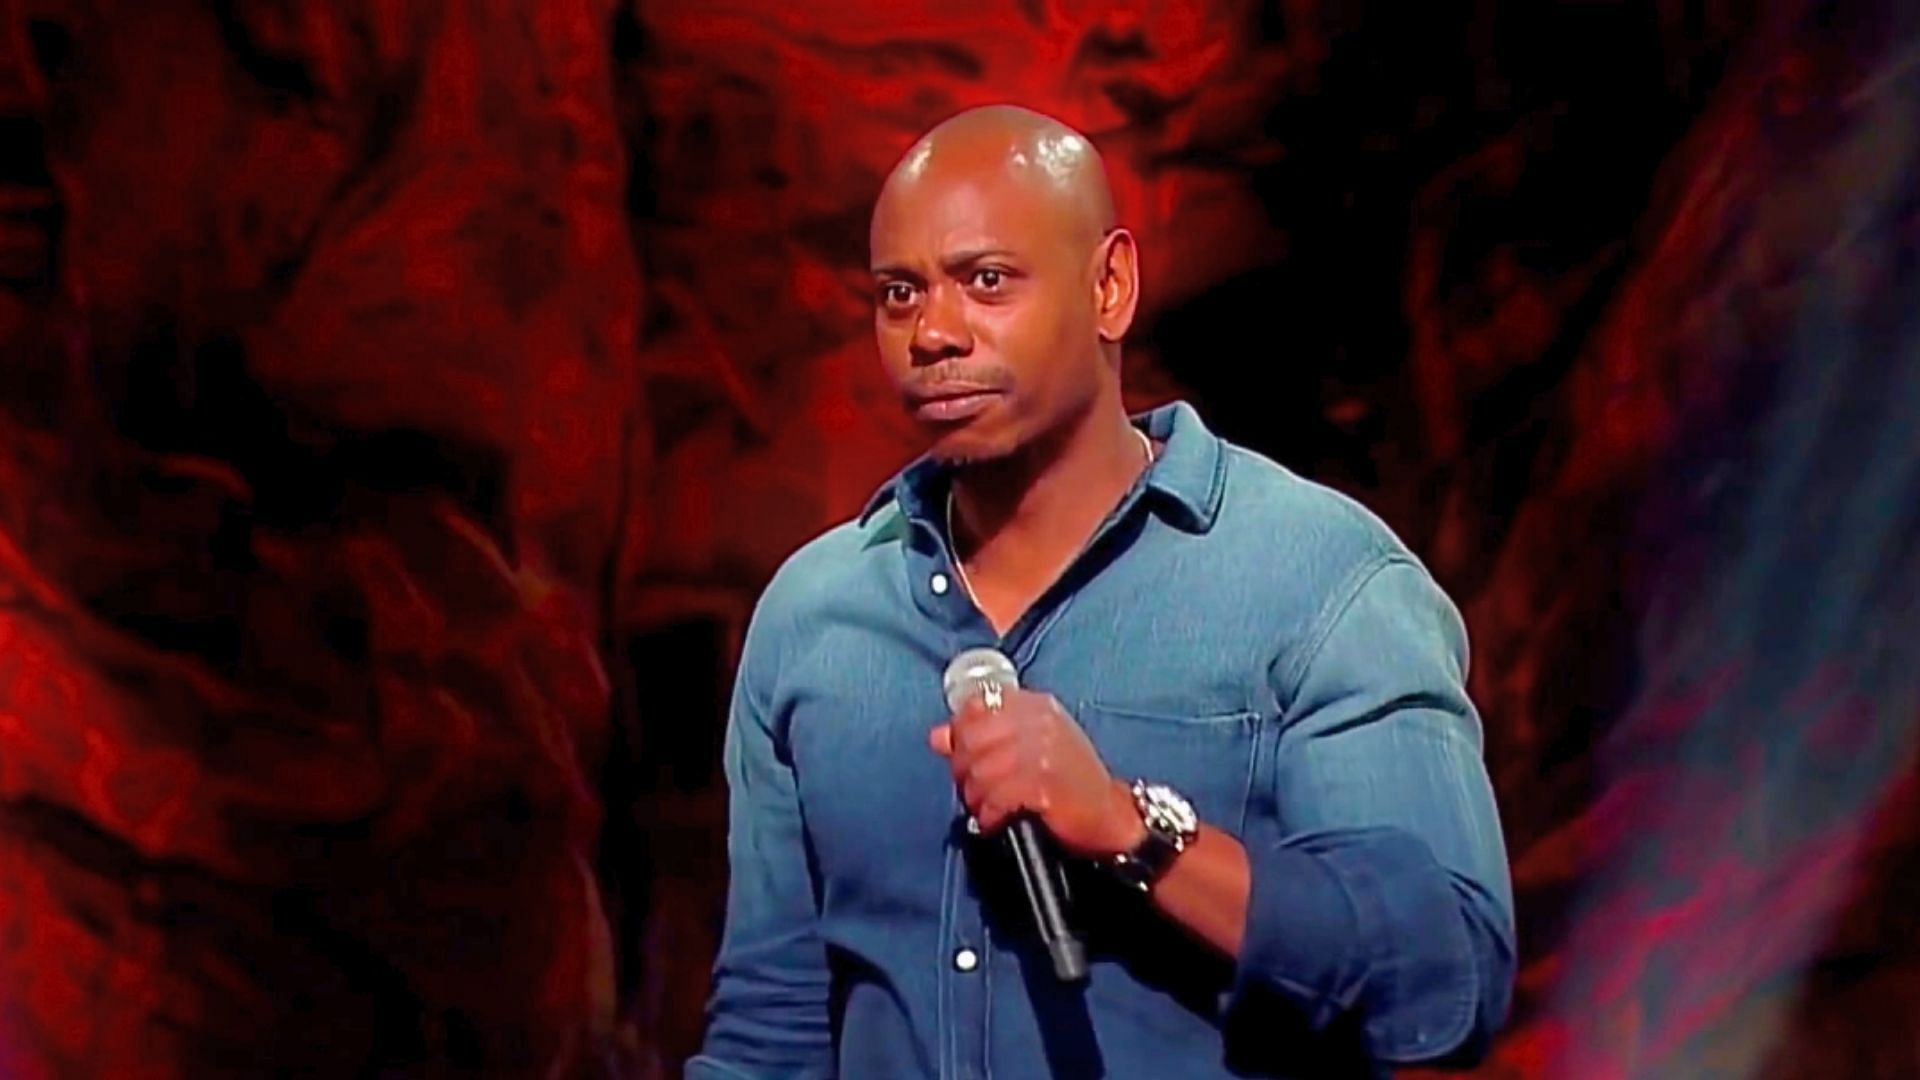 Dave Chapelle needs to be more sensitive, as per Lee (Image via IMDb)